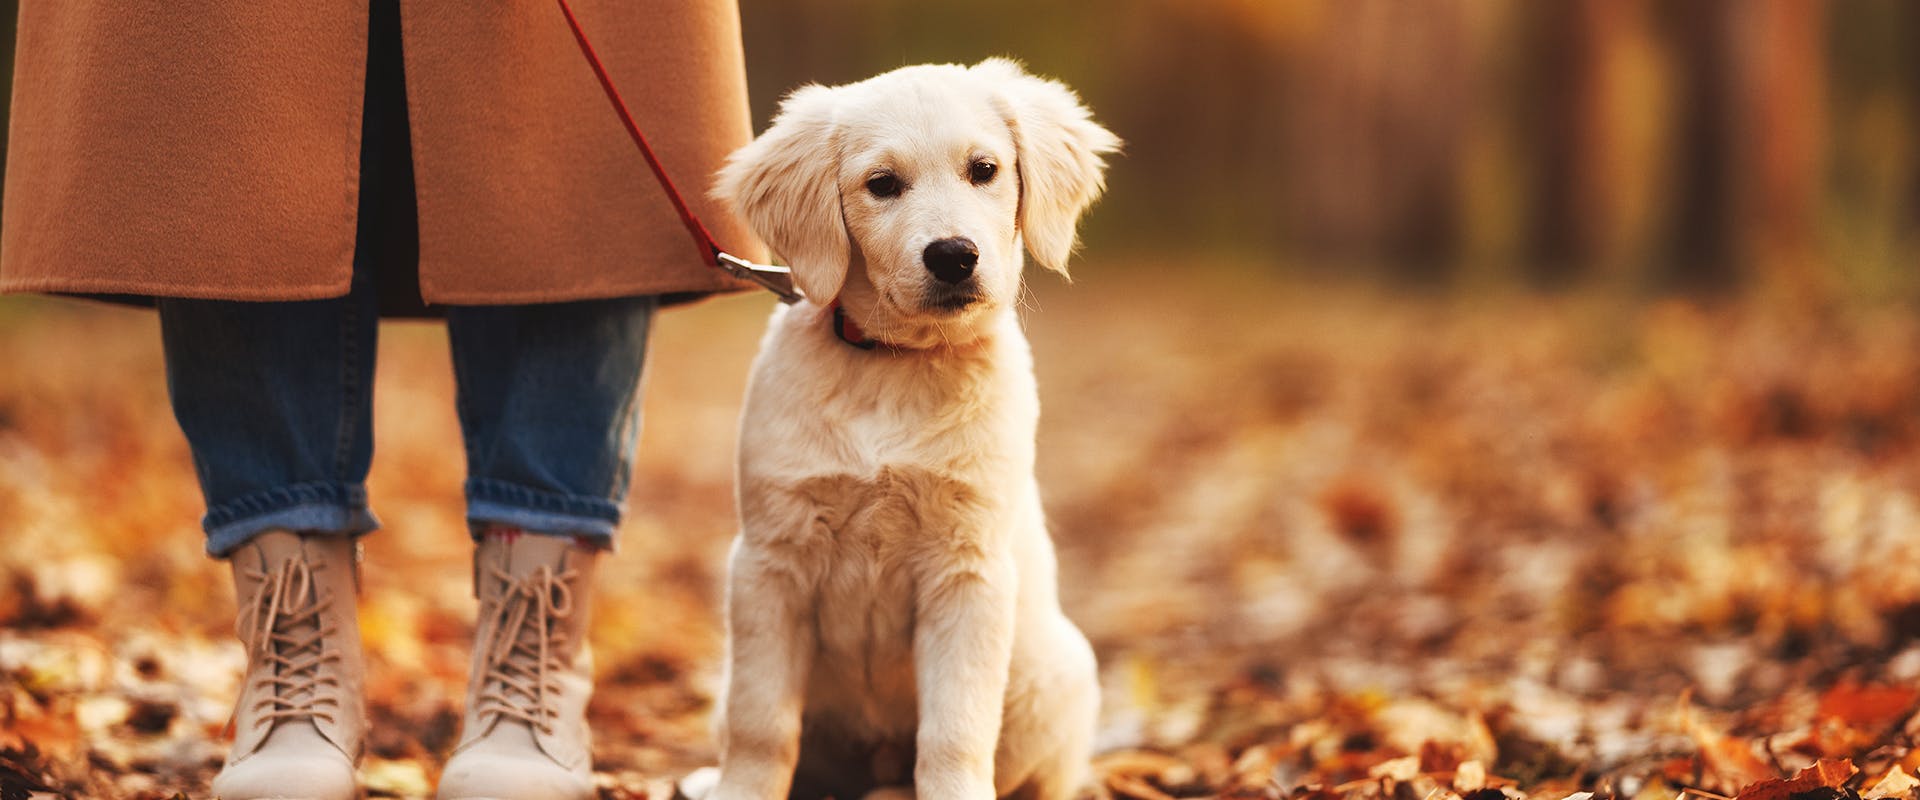 A persons legs, and a small, cute Golden Retriever puppy on a leash out on a walk on autumn leaves